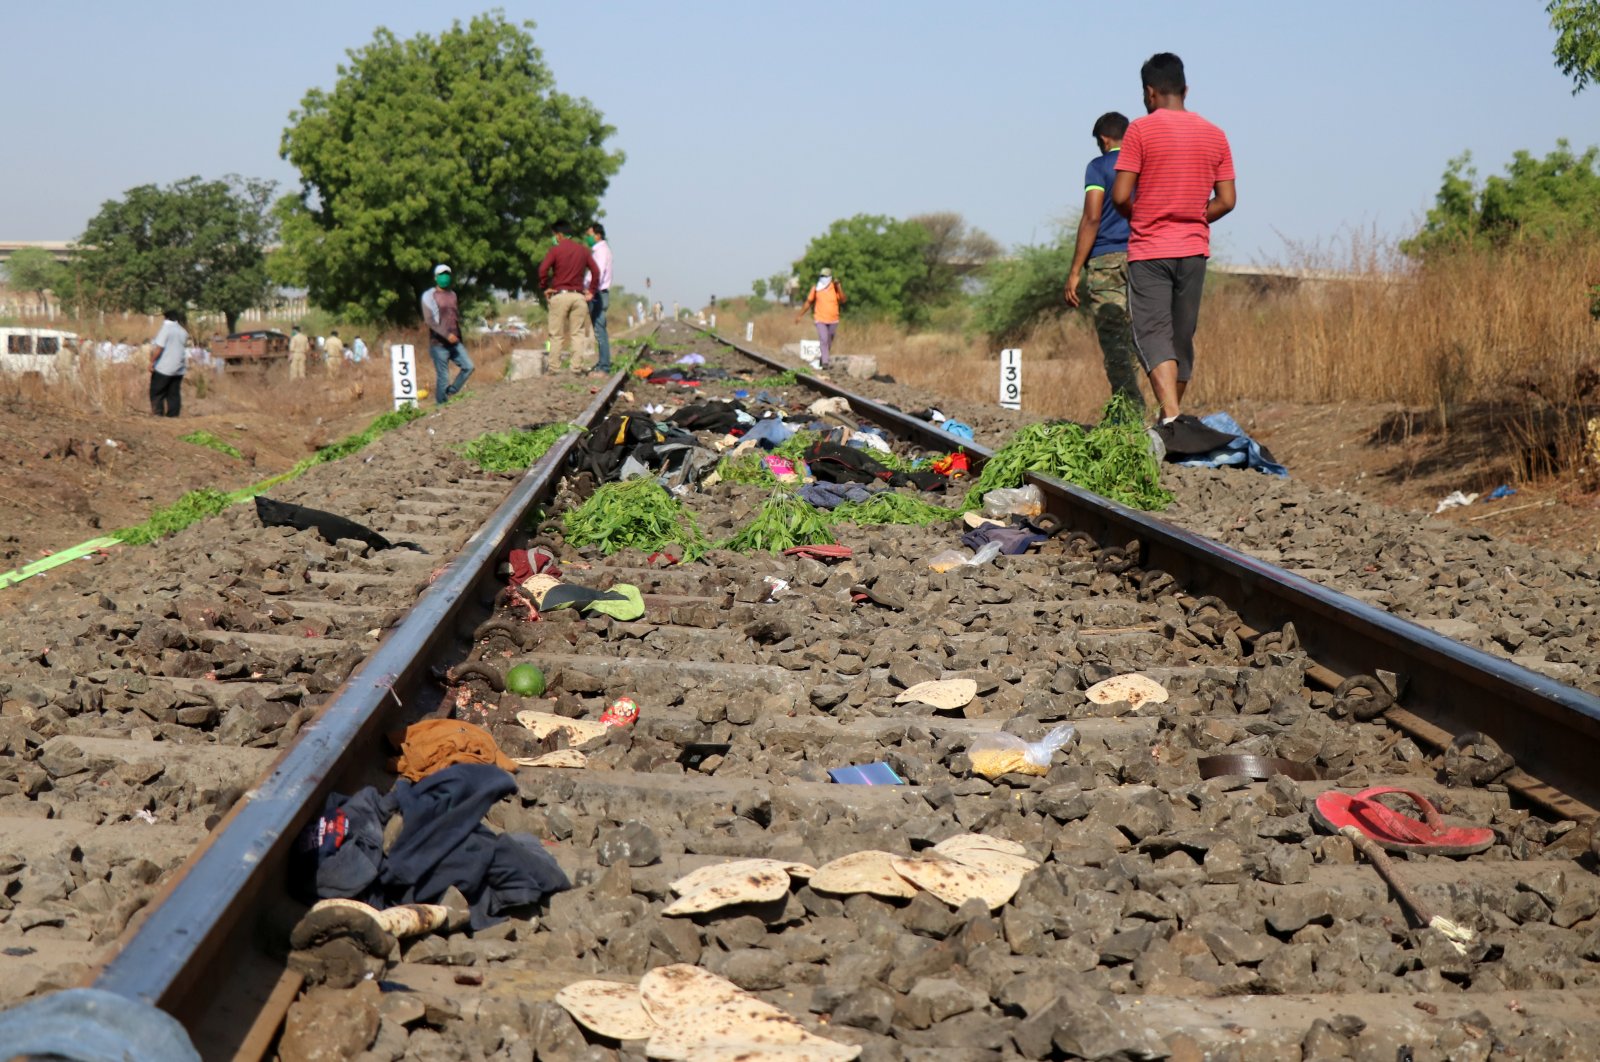 The belongings of victims lie scattered after a train ran over migrant workers sleeping on the track in the Aurangabad district of the western state of Maharashtra, India, May 8, 2020. (Reuters Photo)